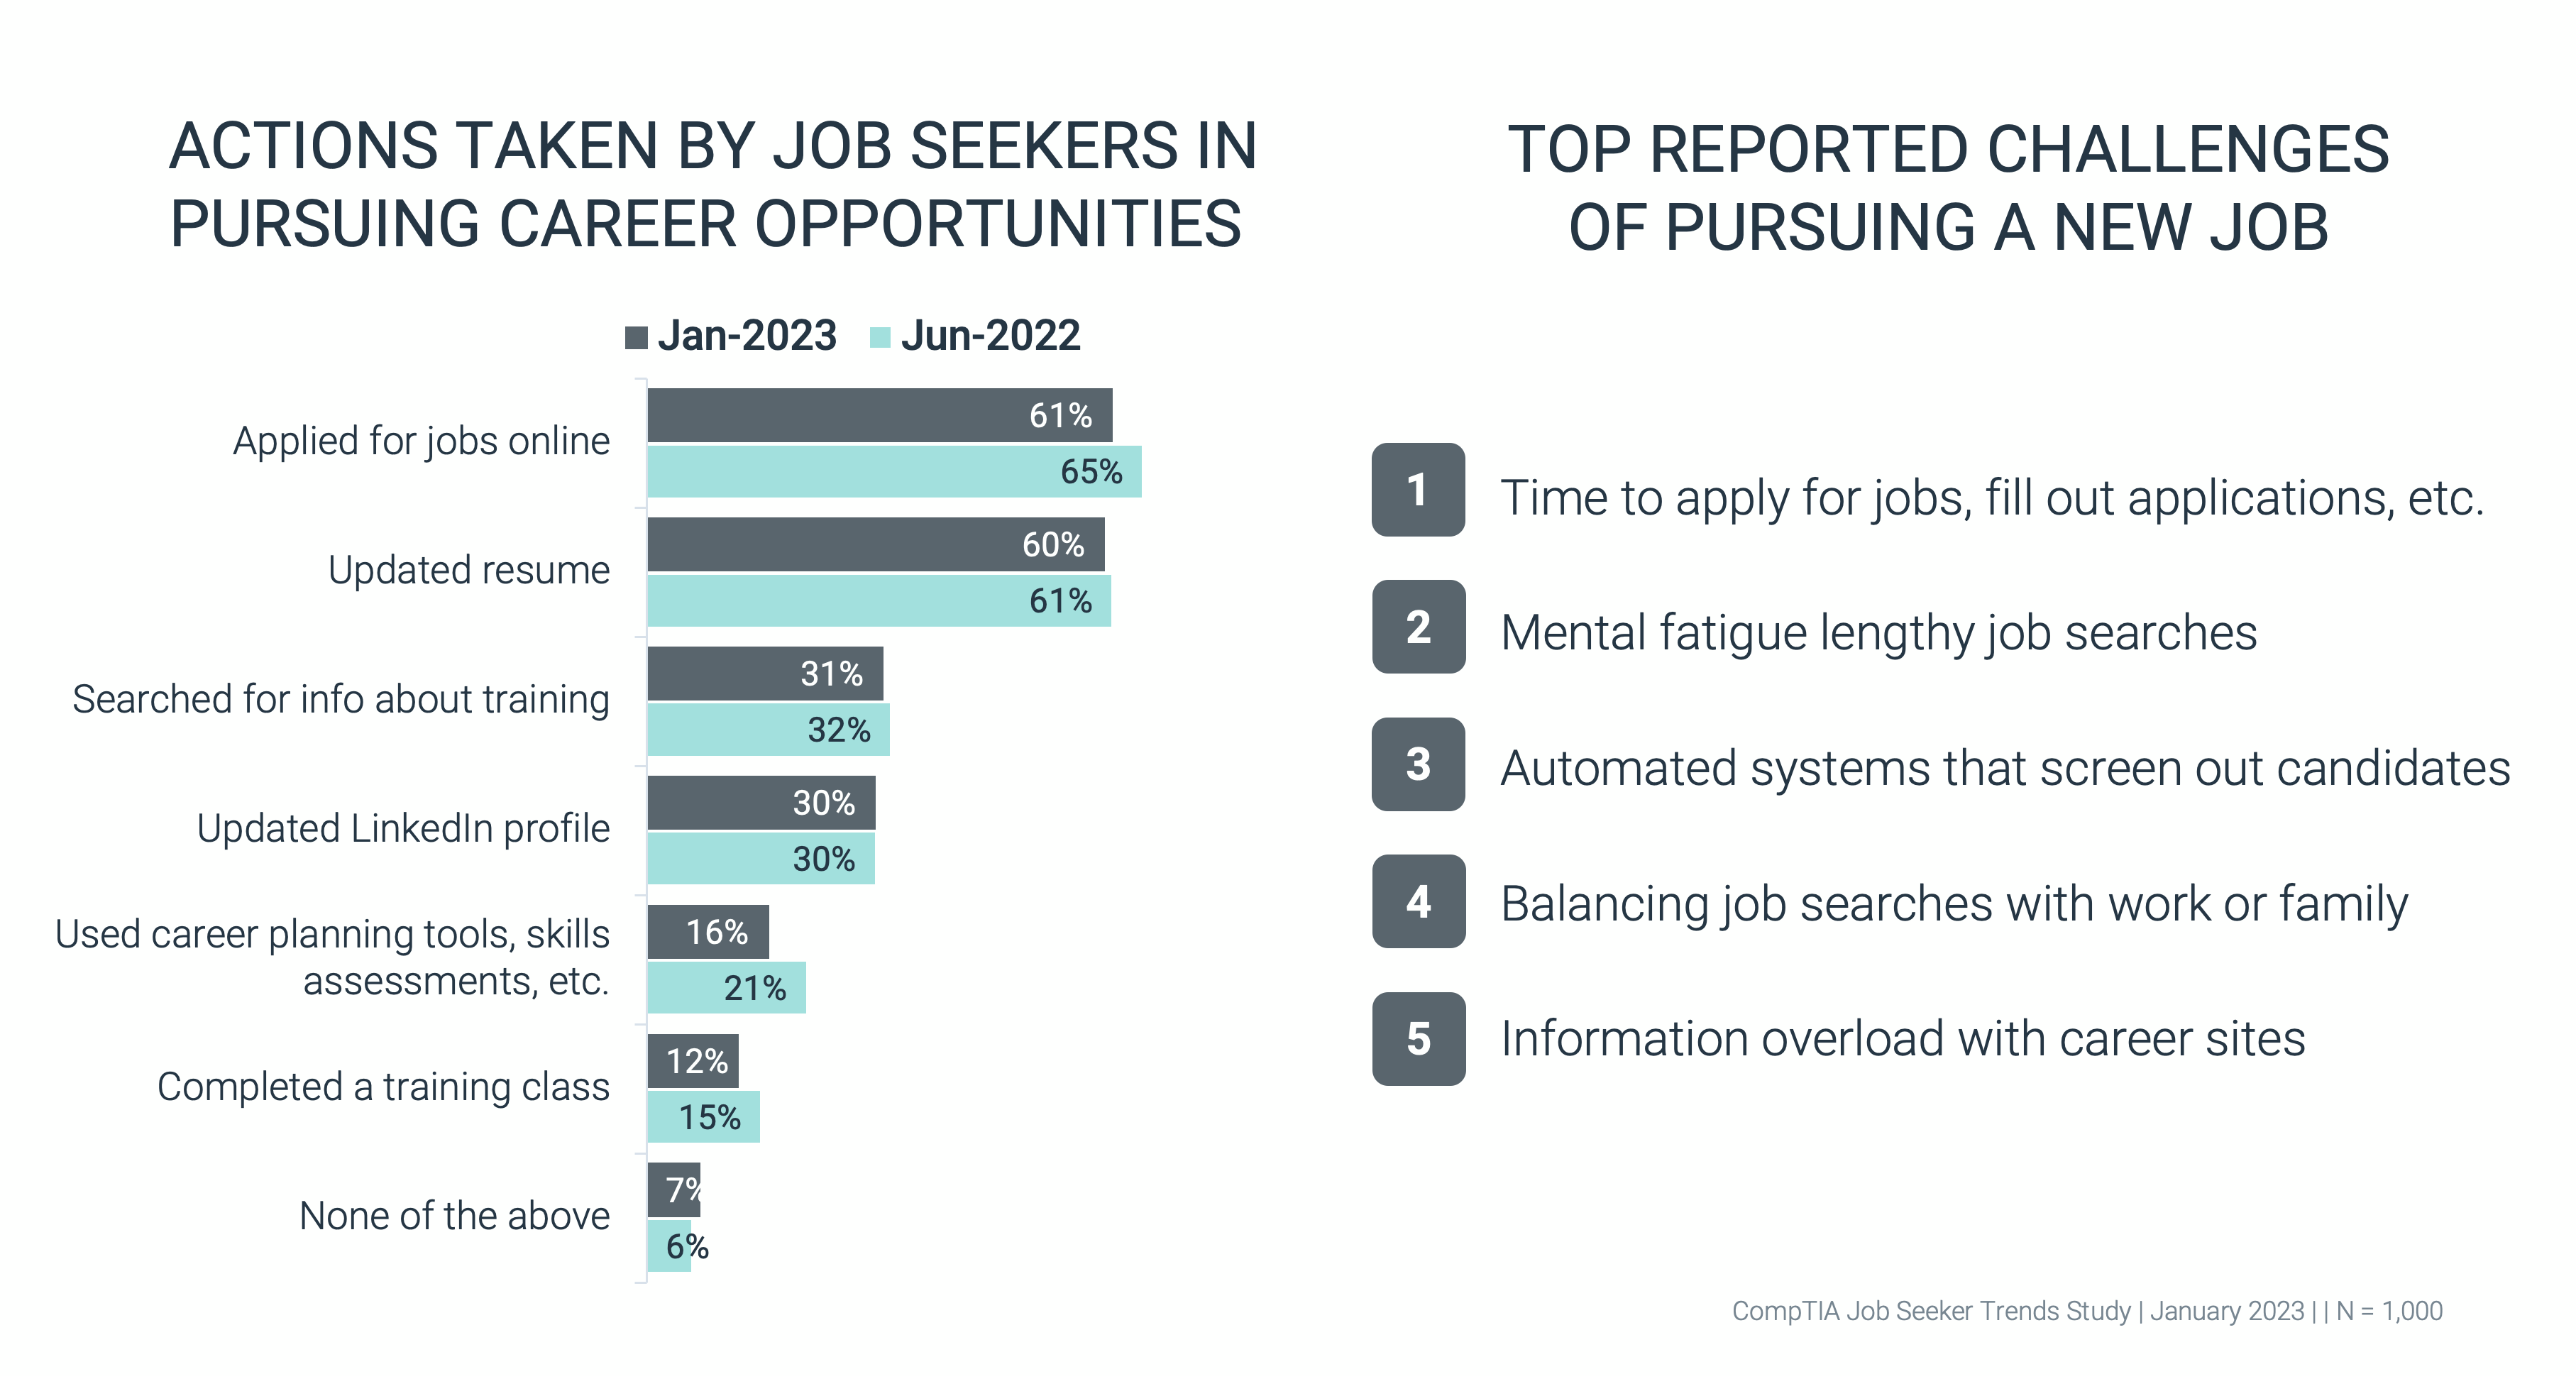 Actions Taken by Job Seekers in Pursuing Career Opportunities